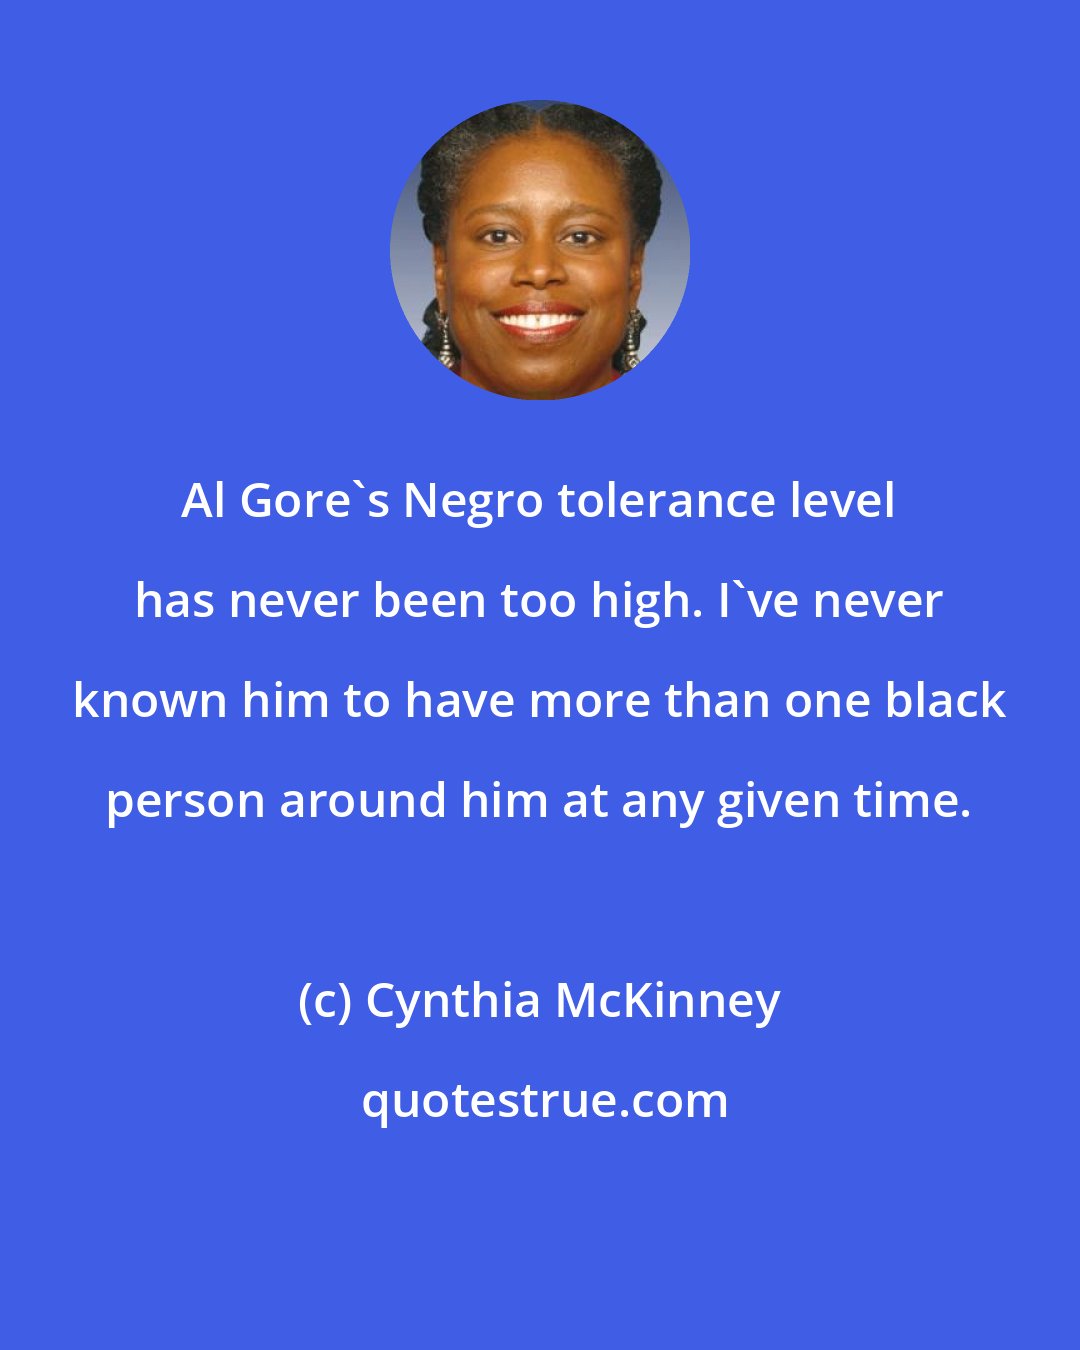 Cynthia McKinney: Al Gore's Negro tolerance level has never been too high. I've never known him to have more than one black person around him at any given time.